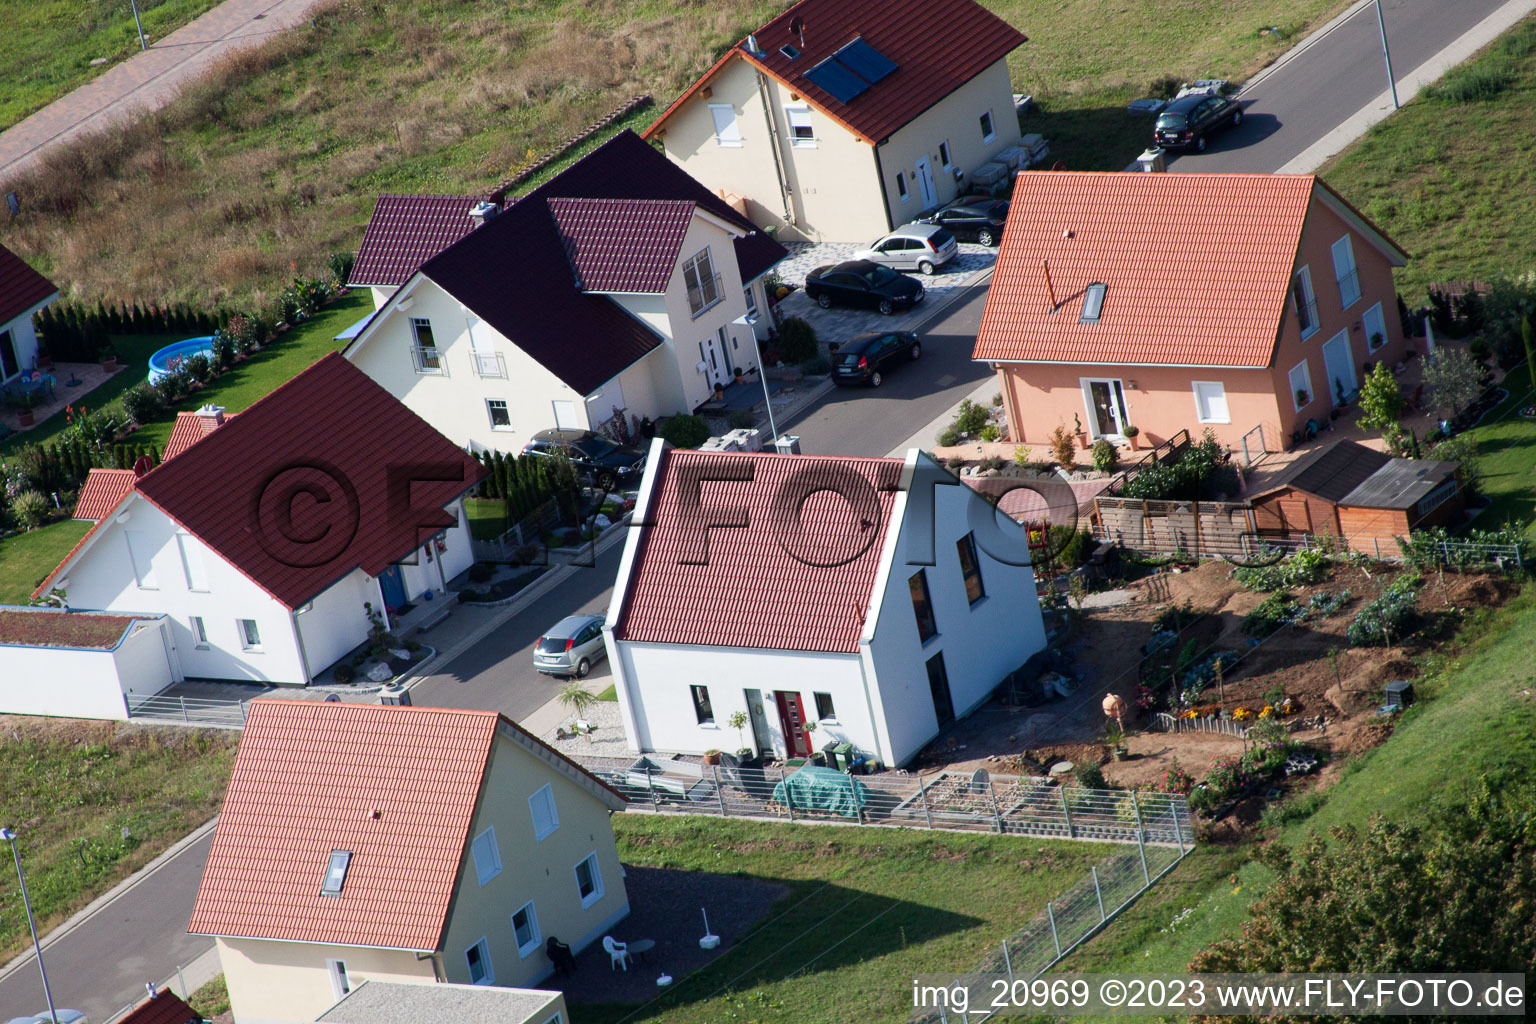 Aerial photograpy of New development area NE in the district Schaidt in Wörth am Rhein in the state Rhineland-Palatinate, Germany